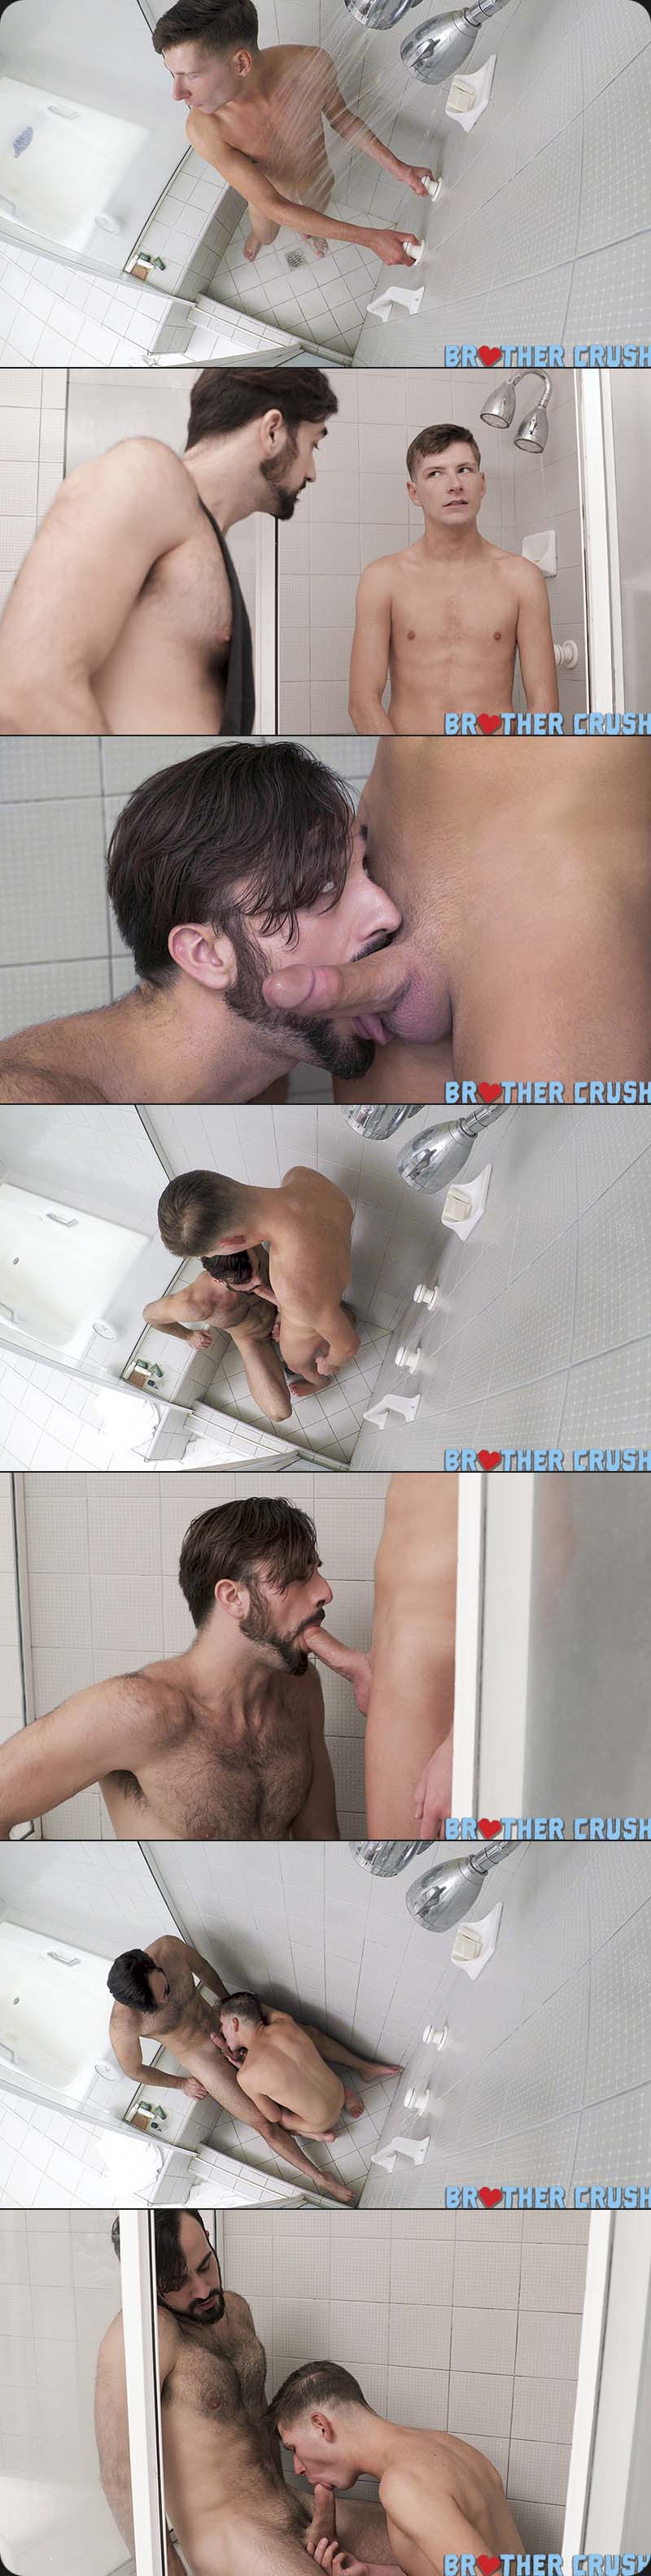 Two P's In a Pod: ALMOST CAUGHT (Mason Lear Fucks Lukas Stone) at Brother Crush